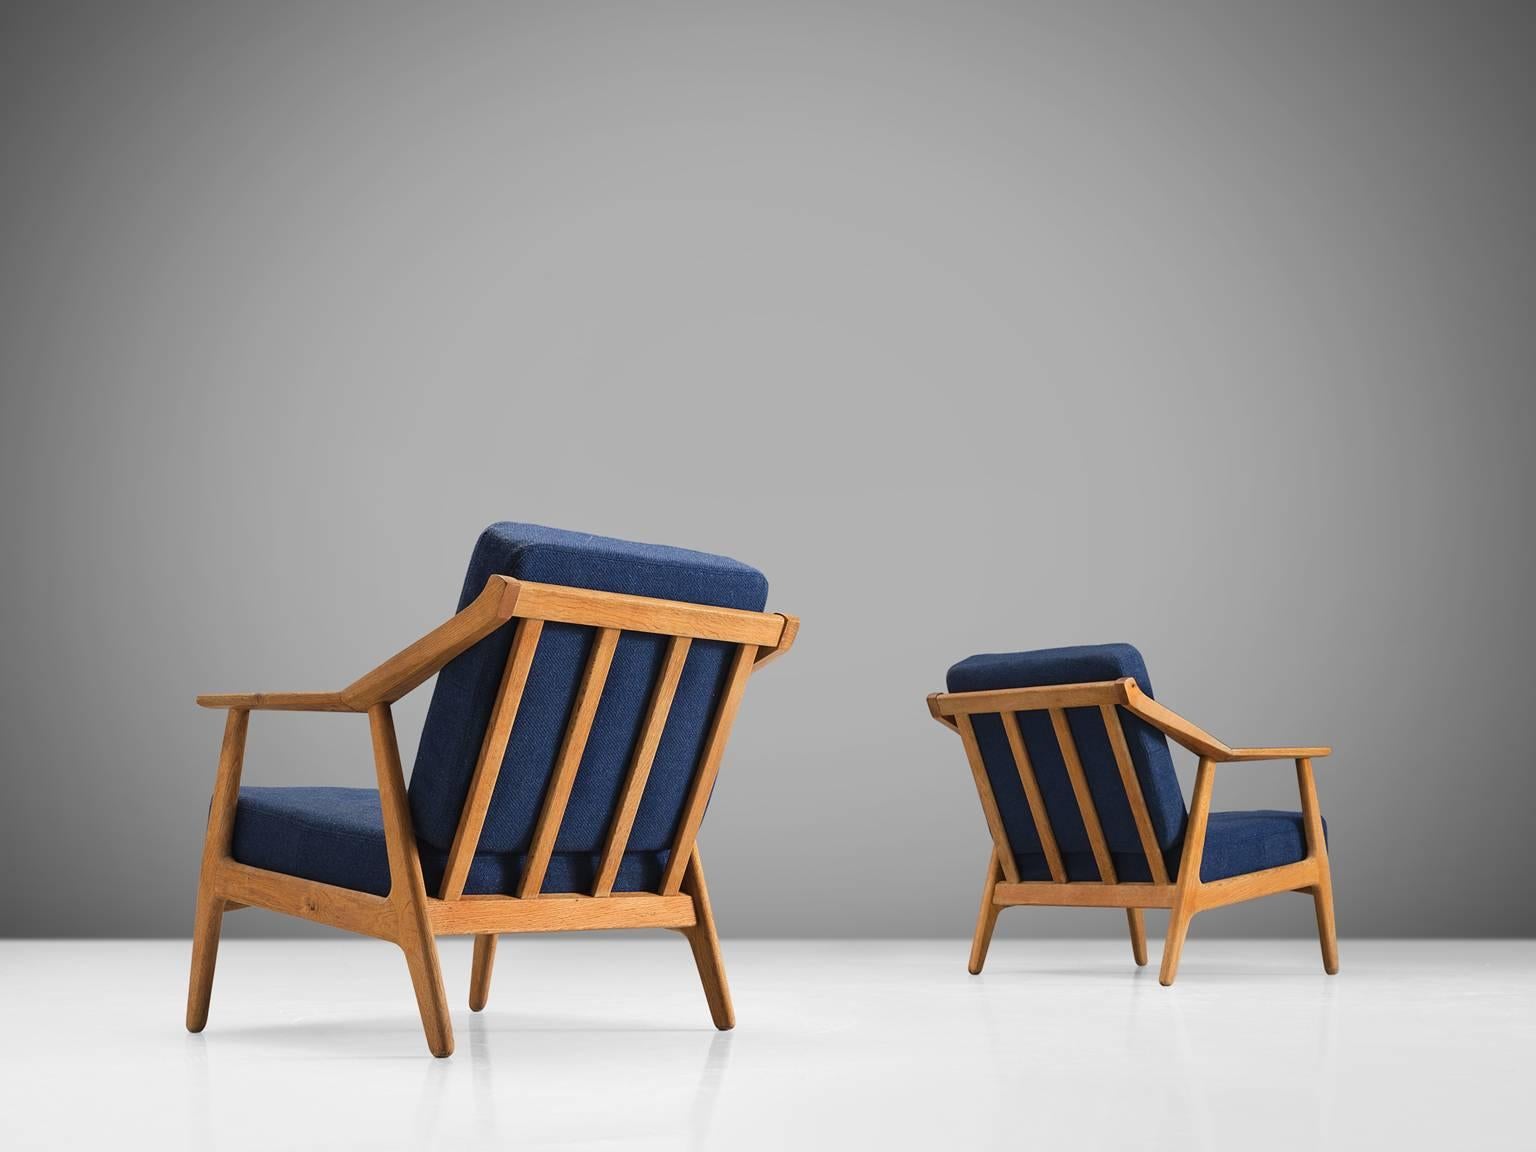 Armchairs, oak, blue fabric, Denmark, 1960s

This set of sculptural armchairs has a slatted back and four circular legs. The armrests are executed with an angle in the middle and this is also the place were the back legs join the frame. The solid